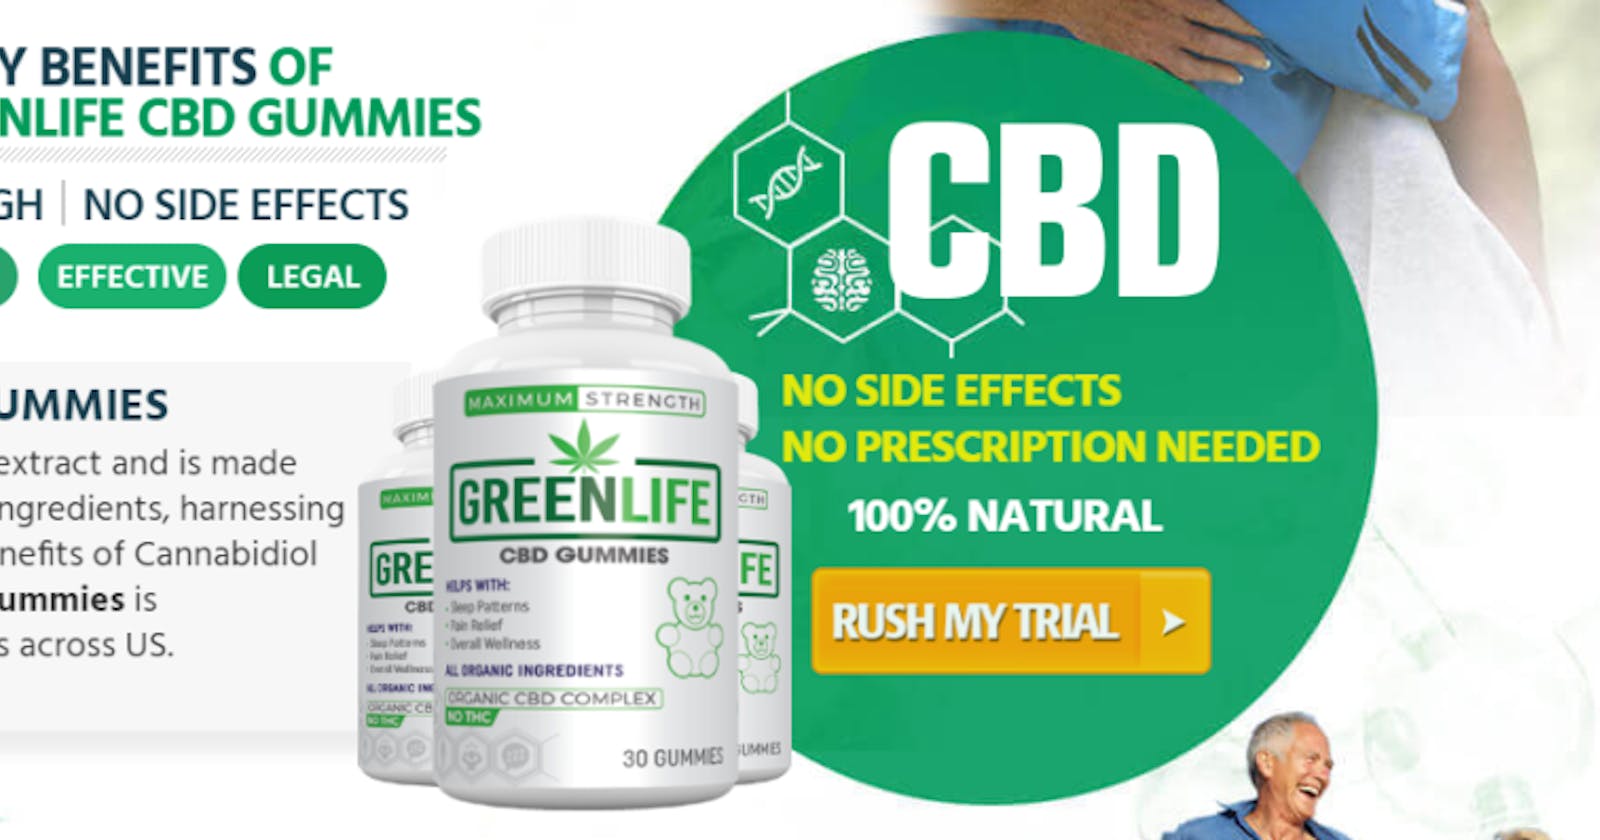 GreenLife CBD Gummies REVIEWS: ( ) IS ULY CBD GUMMIES REALLY WORKS OR SAFE , BENEFITS, INGREDIENTS & Shocking PRICE!!?